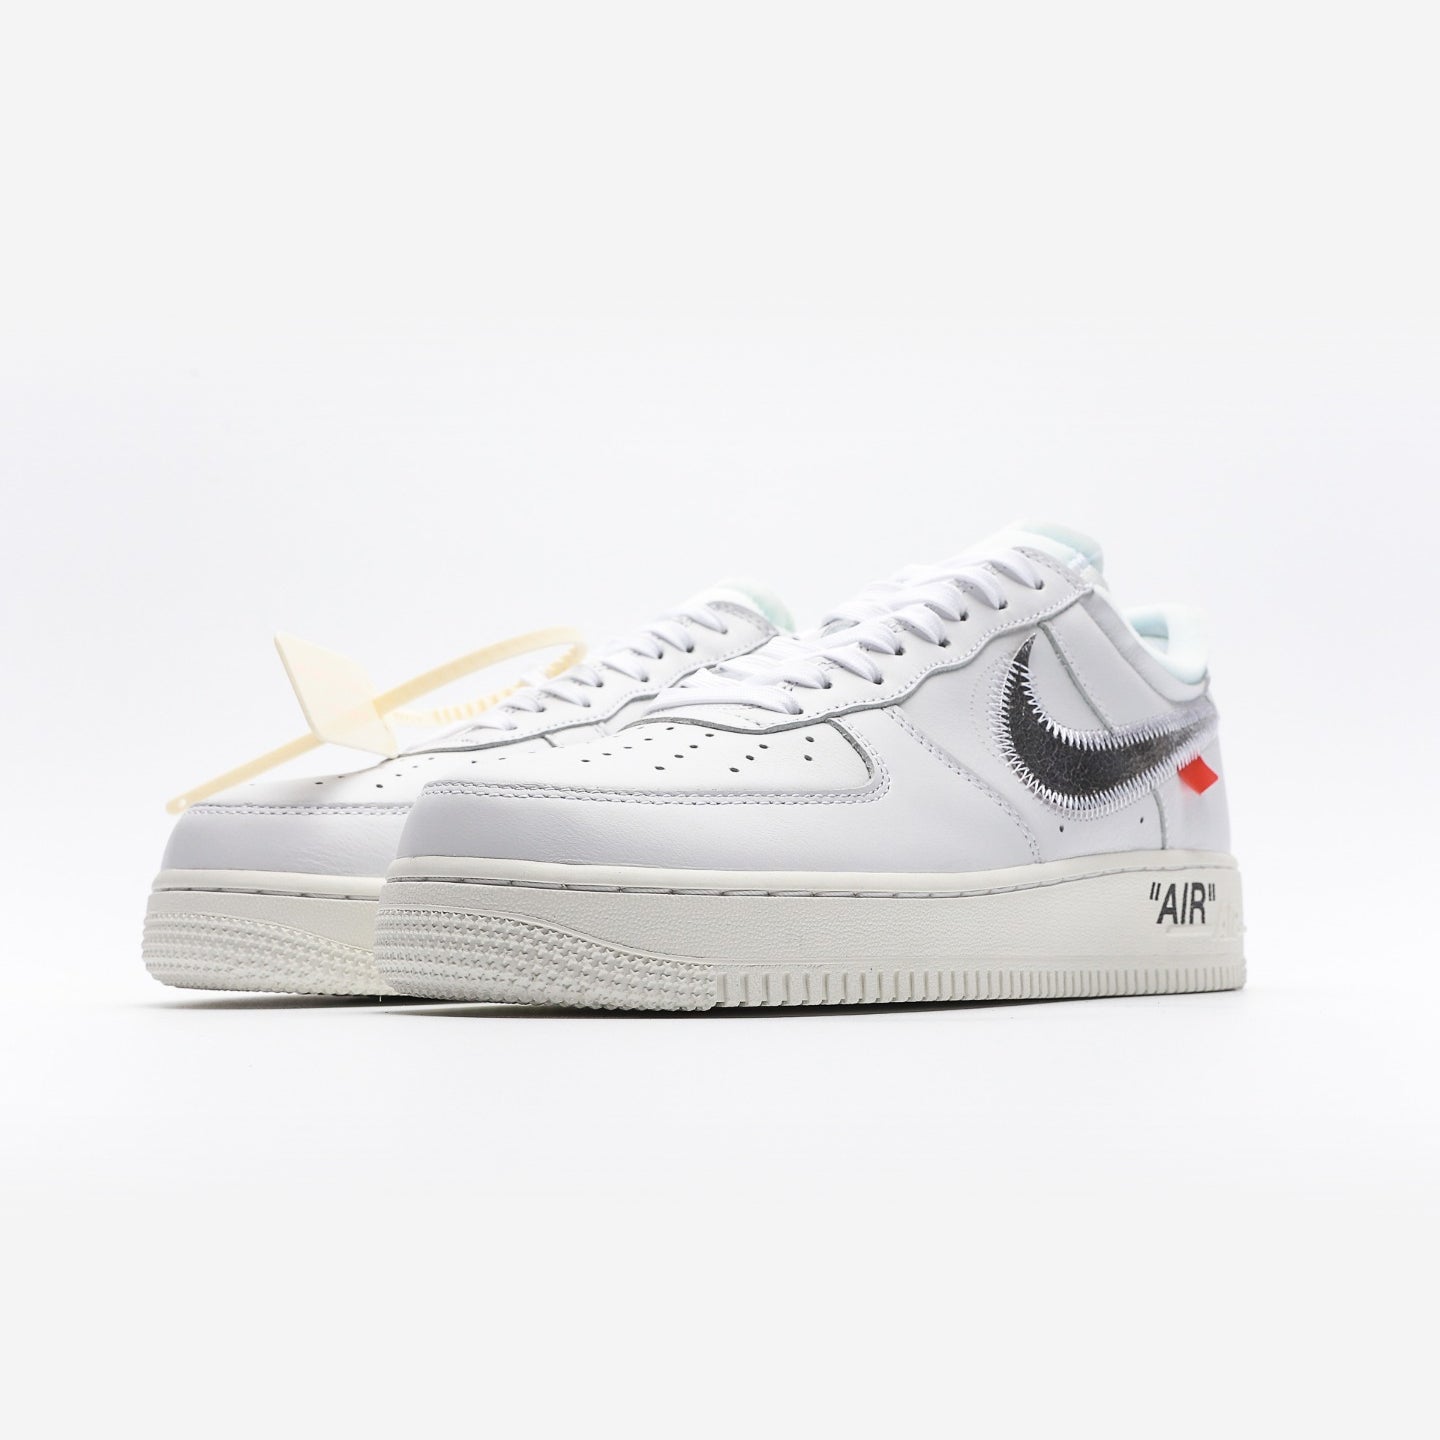 Off-White x Nike Air Force 1 Low ComplexCon - Urbanize Streetwear